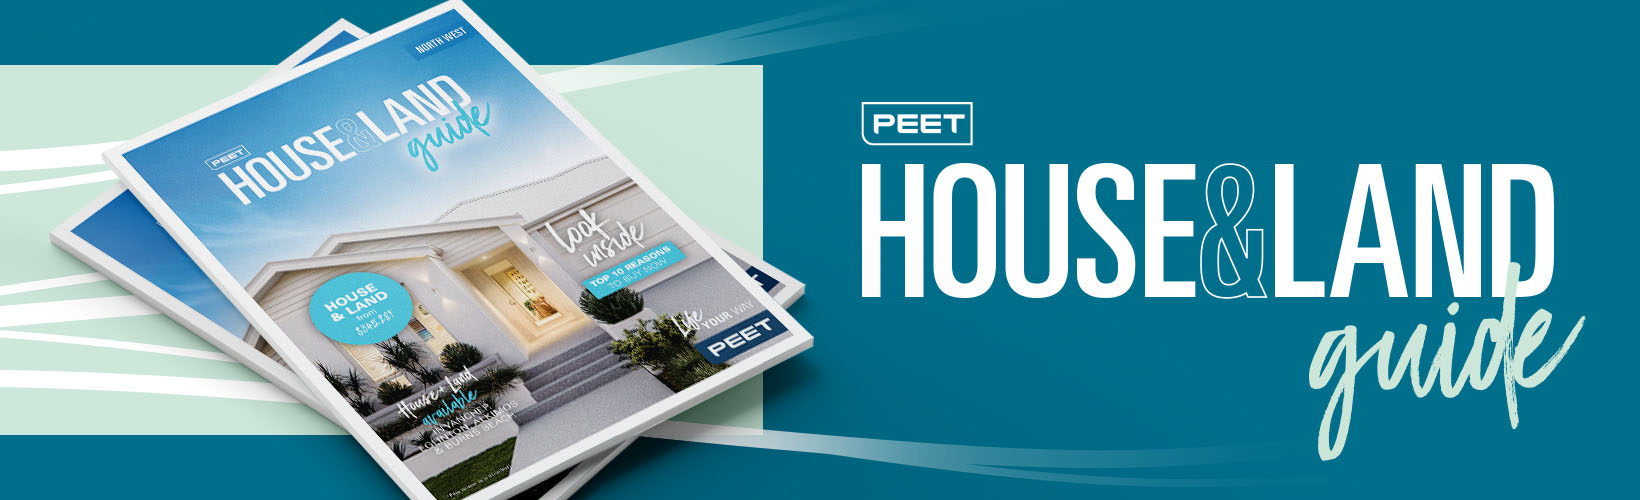 Peet House and Land Guide